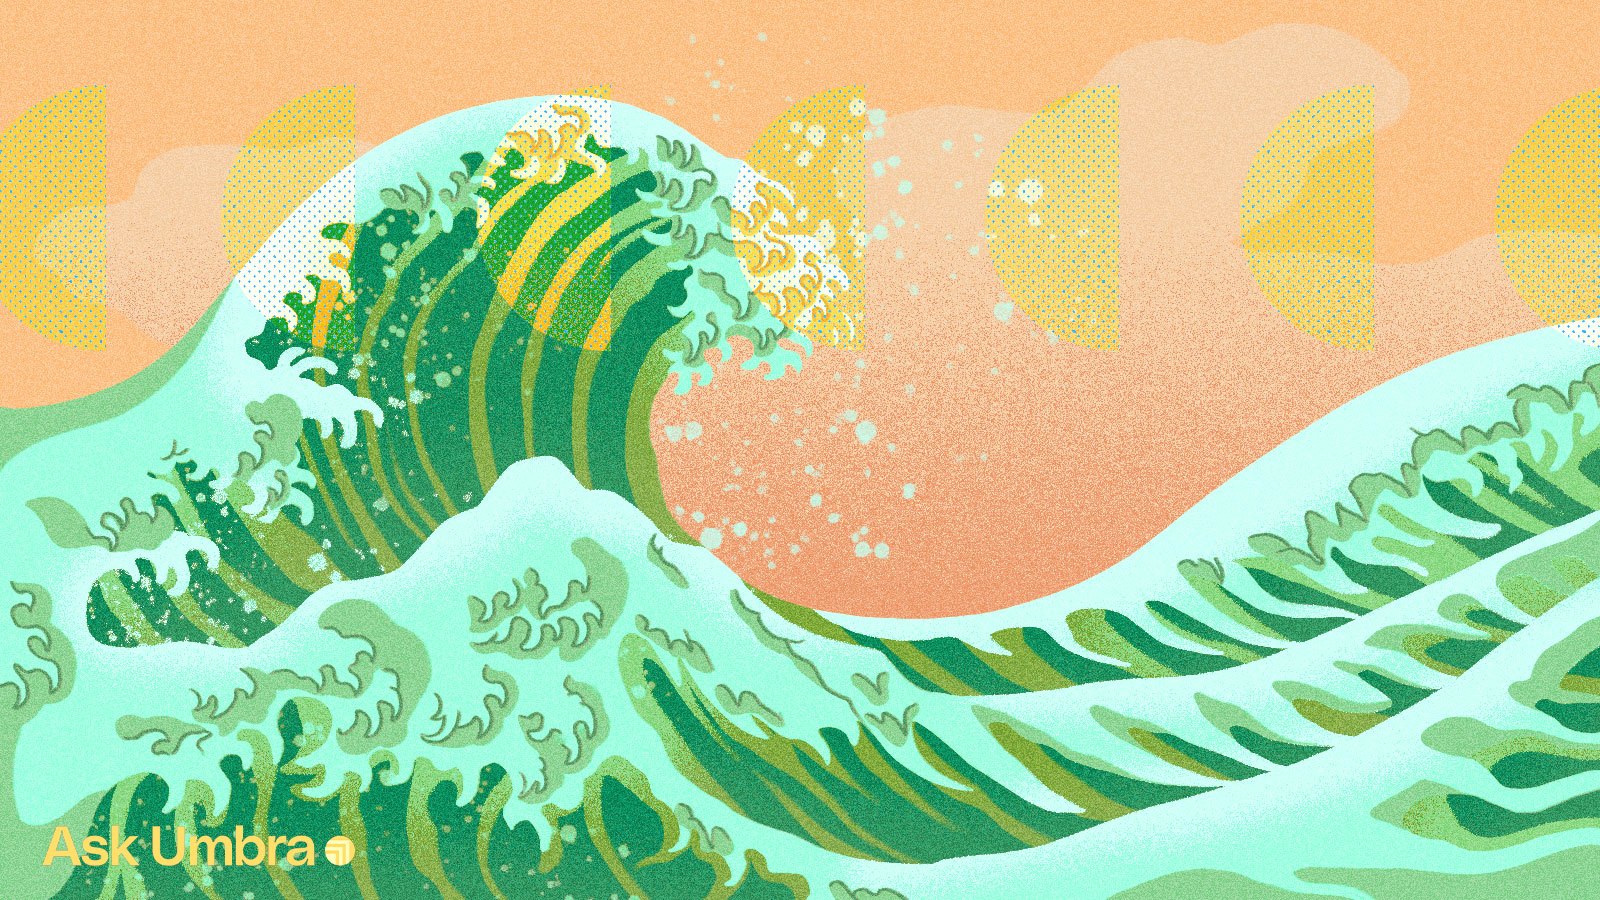 Illustration of a green wave in the style of Hokusai